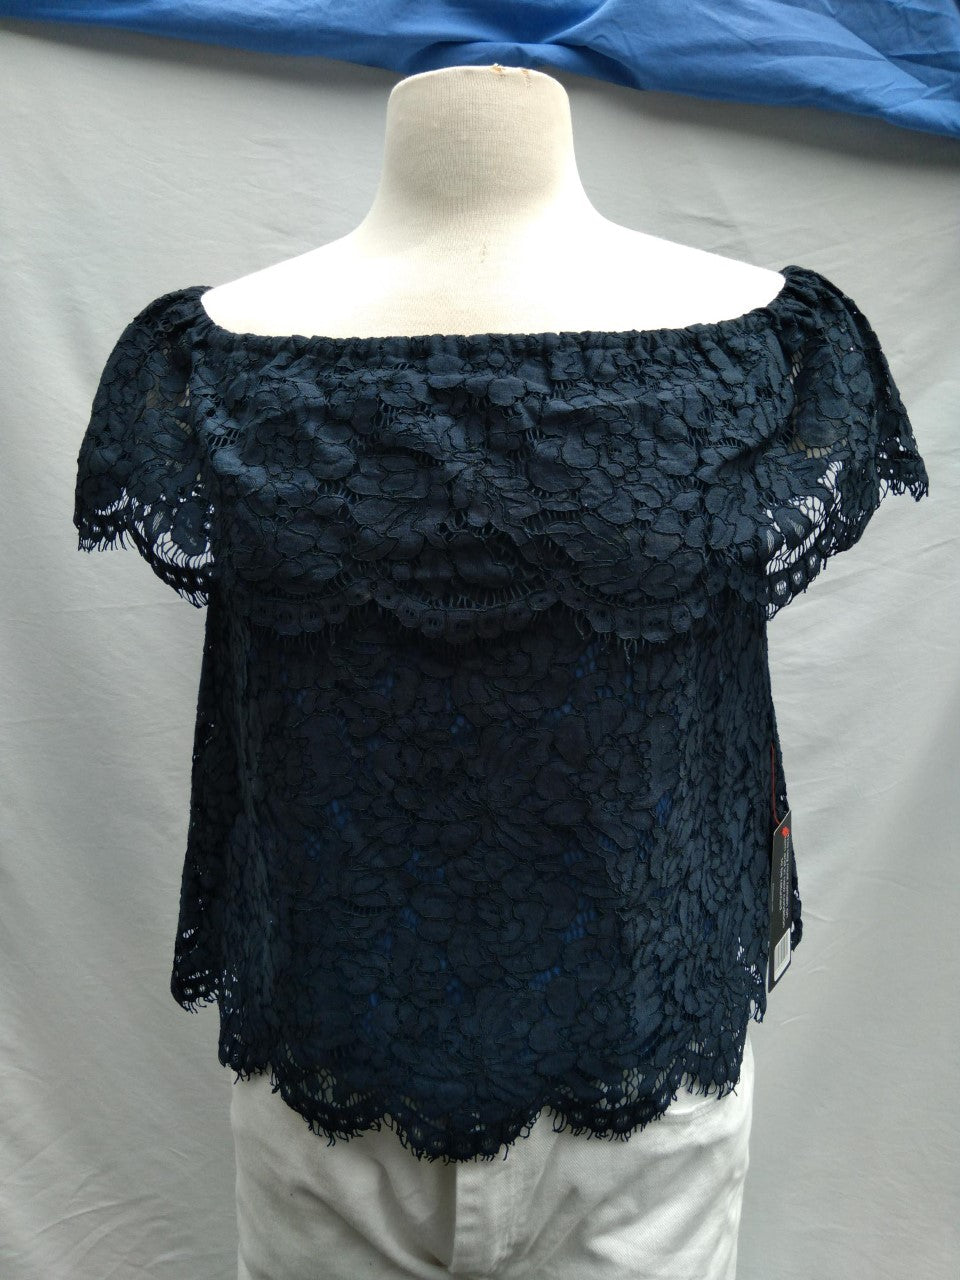 NWT - Olivia Grey navy Daily Look Ruffled Off Shoulder Lace Top - M